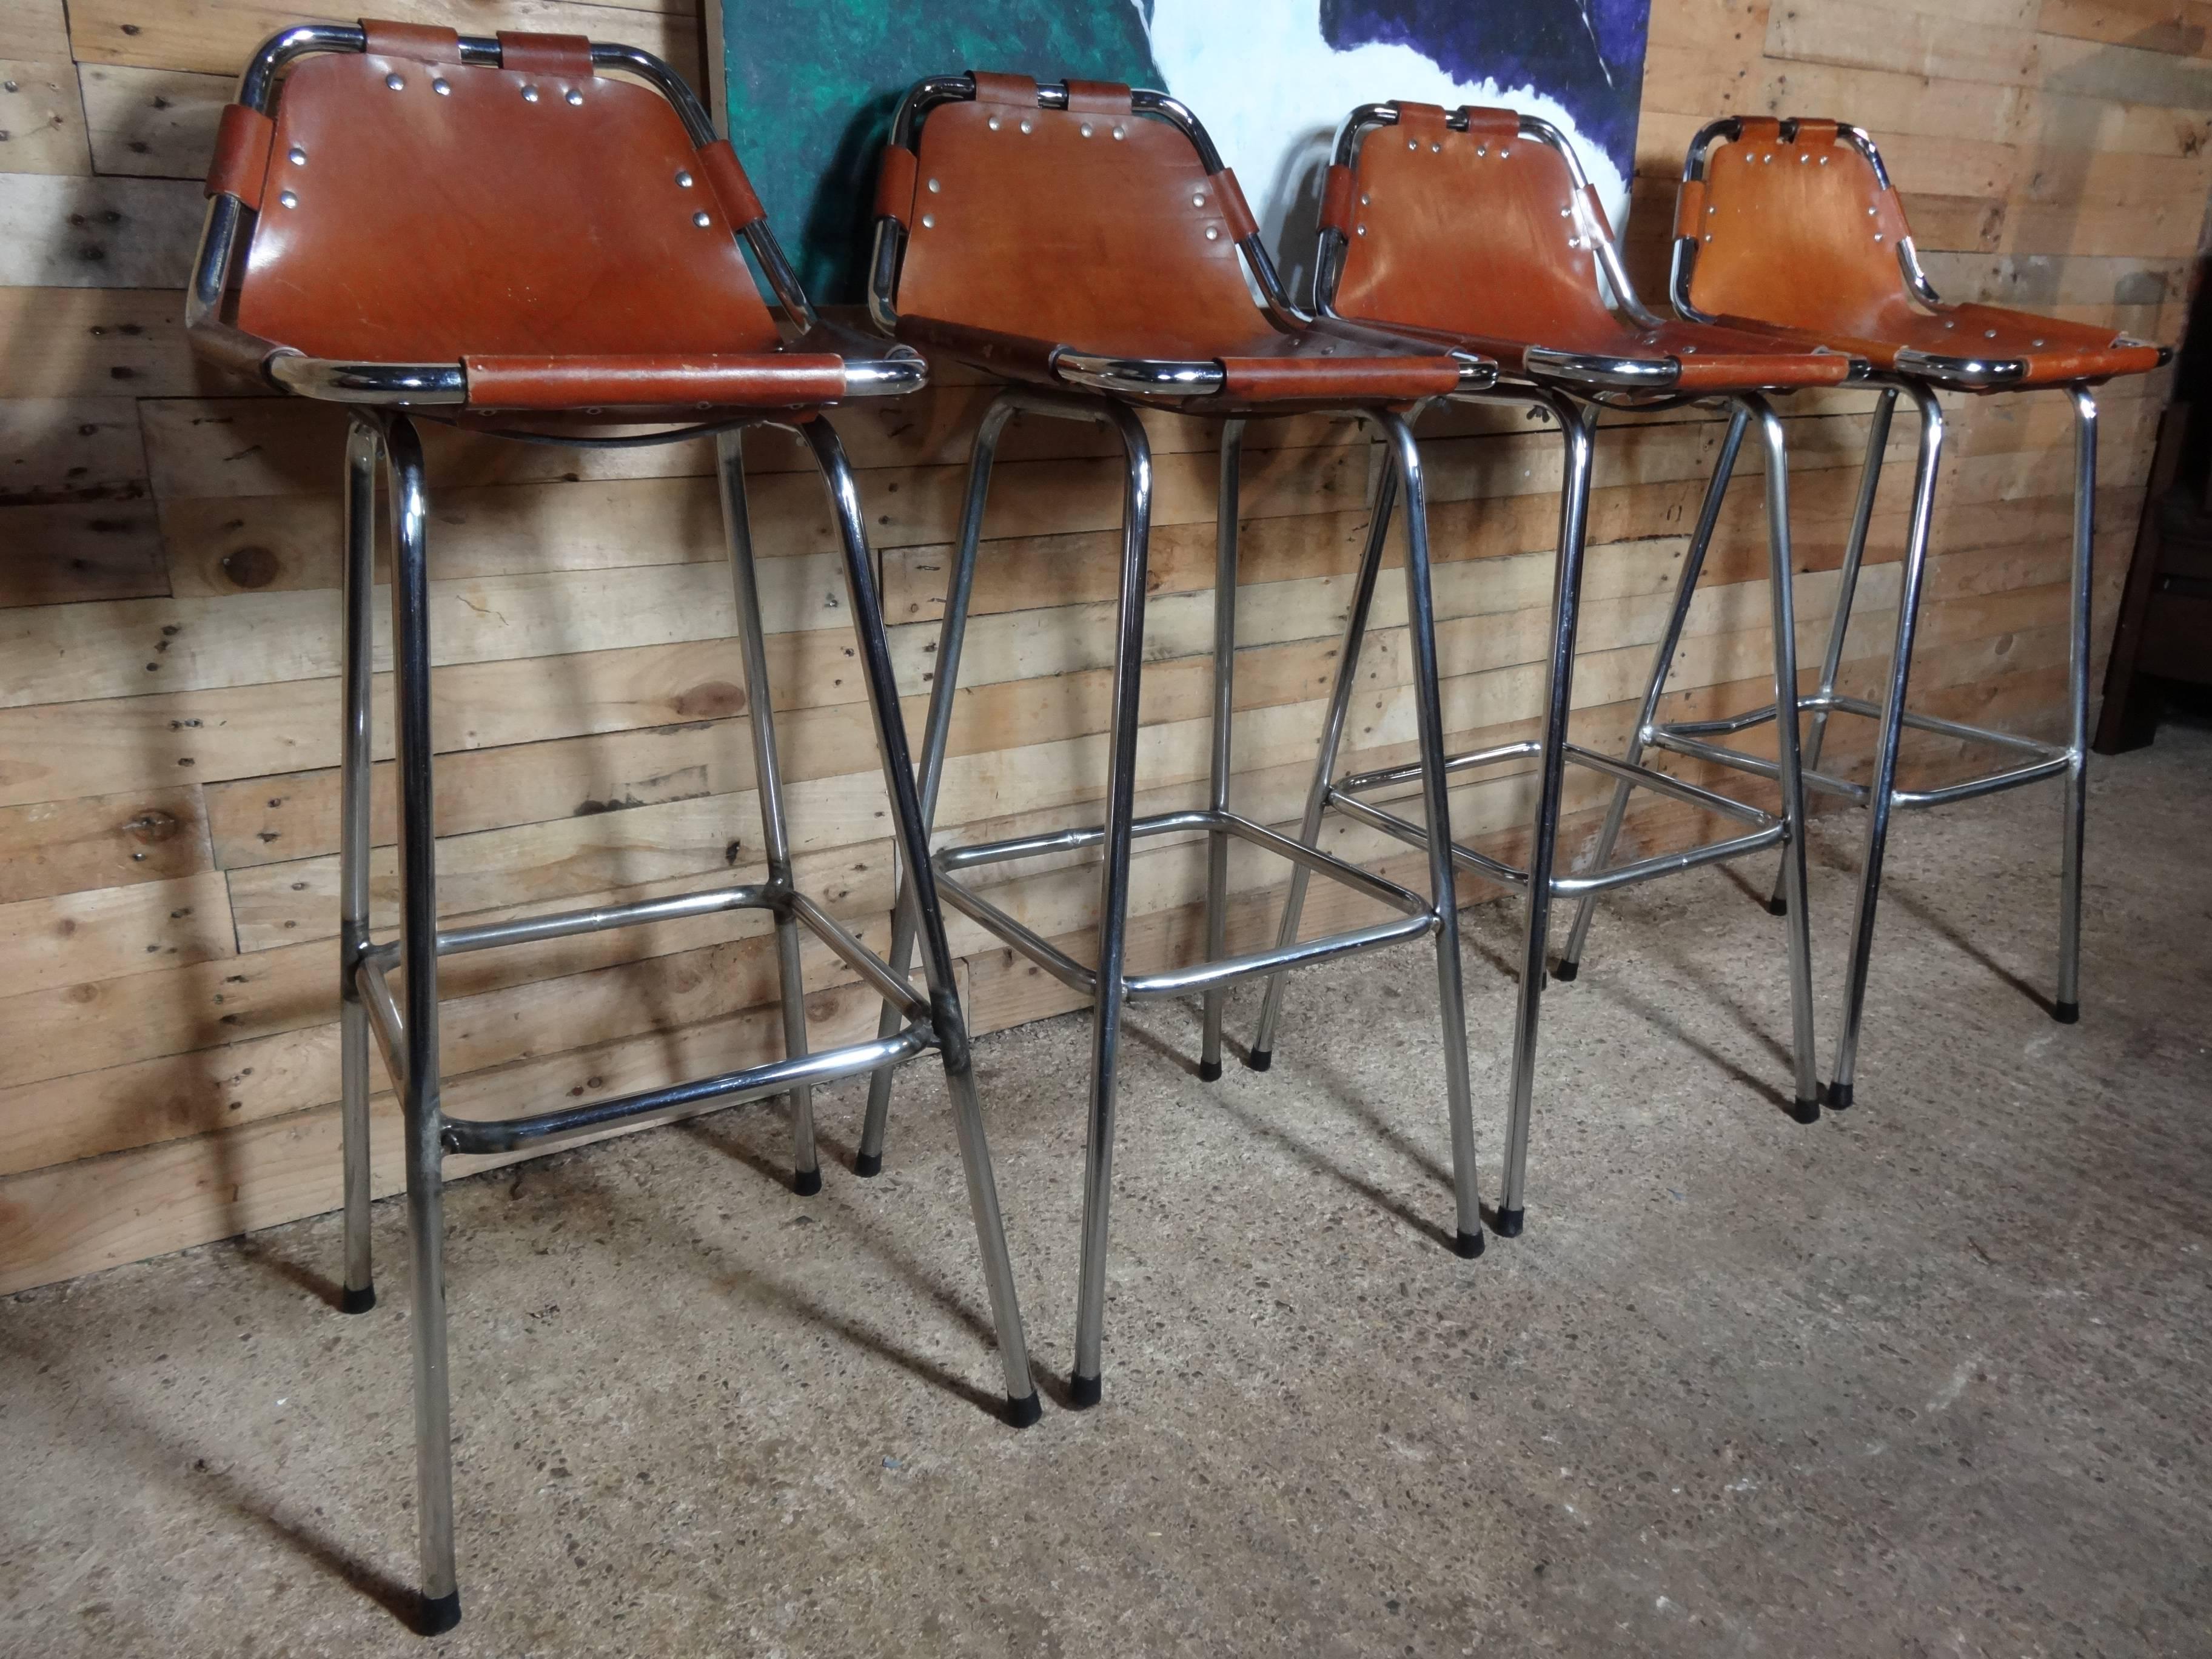 Metal Selected by Charlotte Perriand for the Les Arcs Ski Resort, Four High Bar Stools